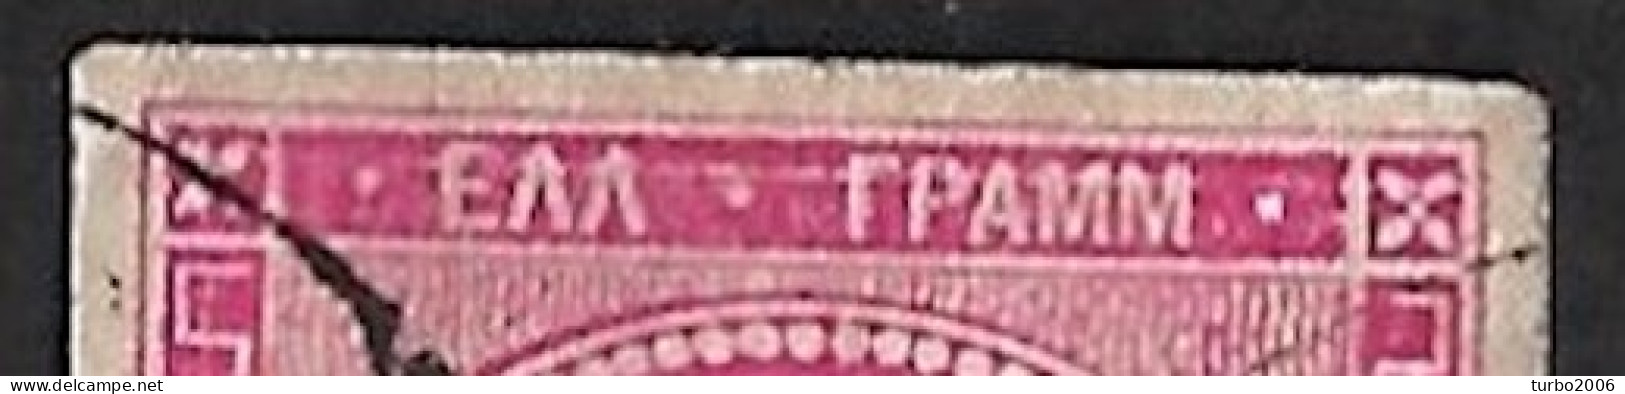 Plateflaw 20F6 (horizontal Line) In GREECE 1880-86 Large Hermes Head Athens Issue 20 L Aniline Red Vl. 72 A / H 59 II A - Usados